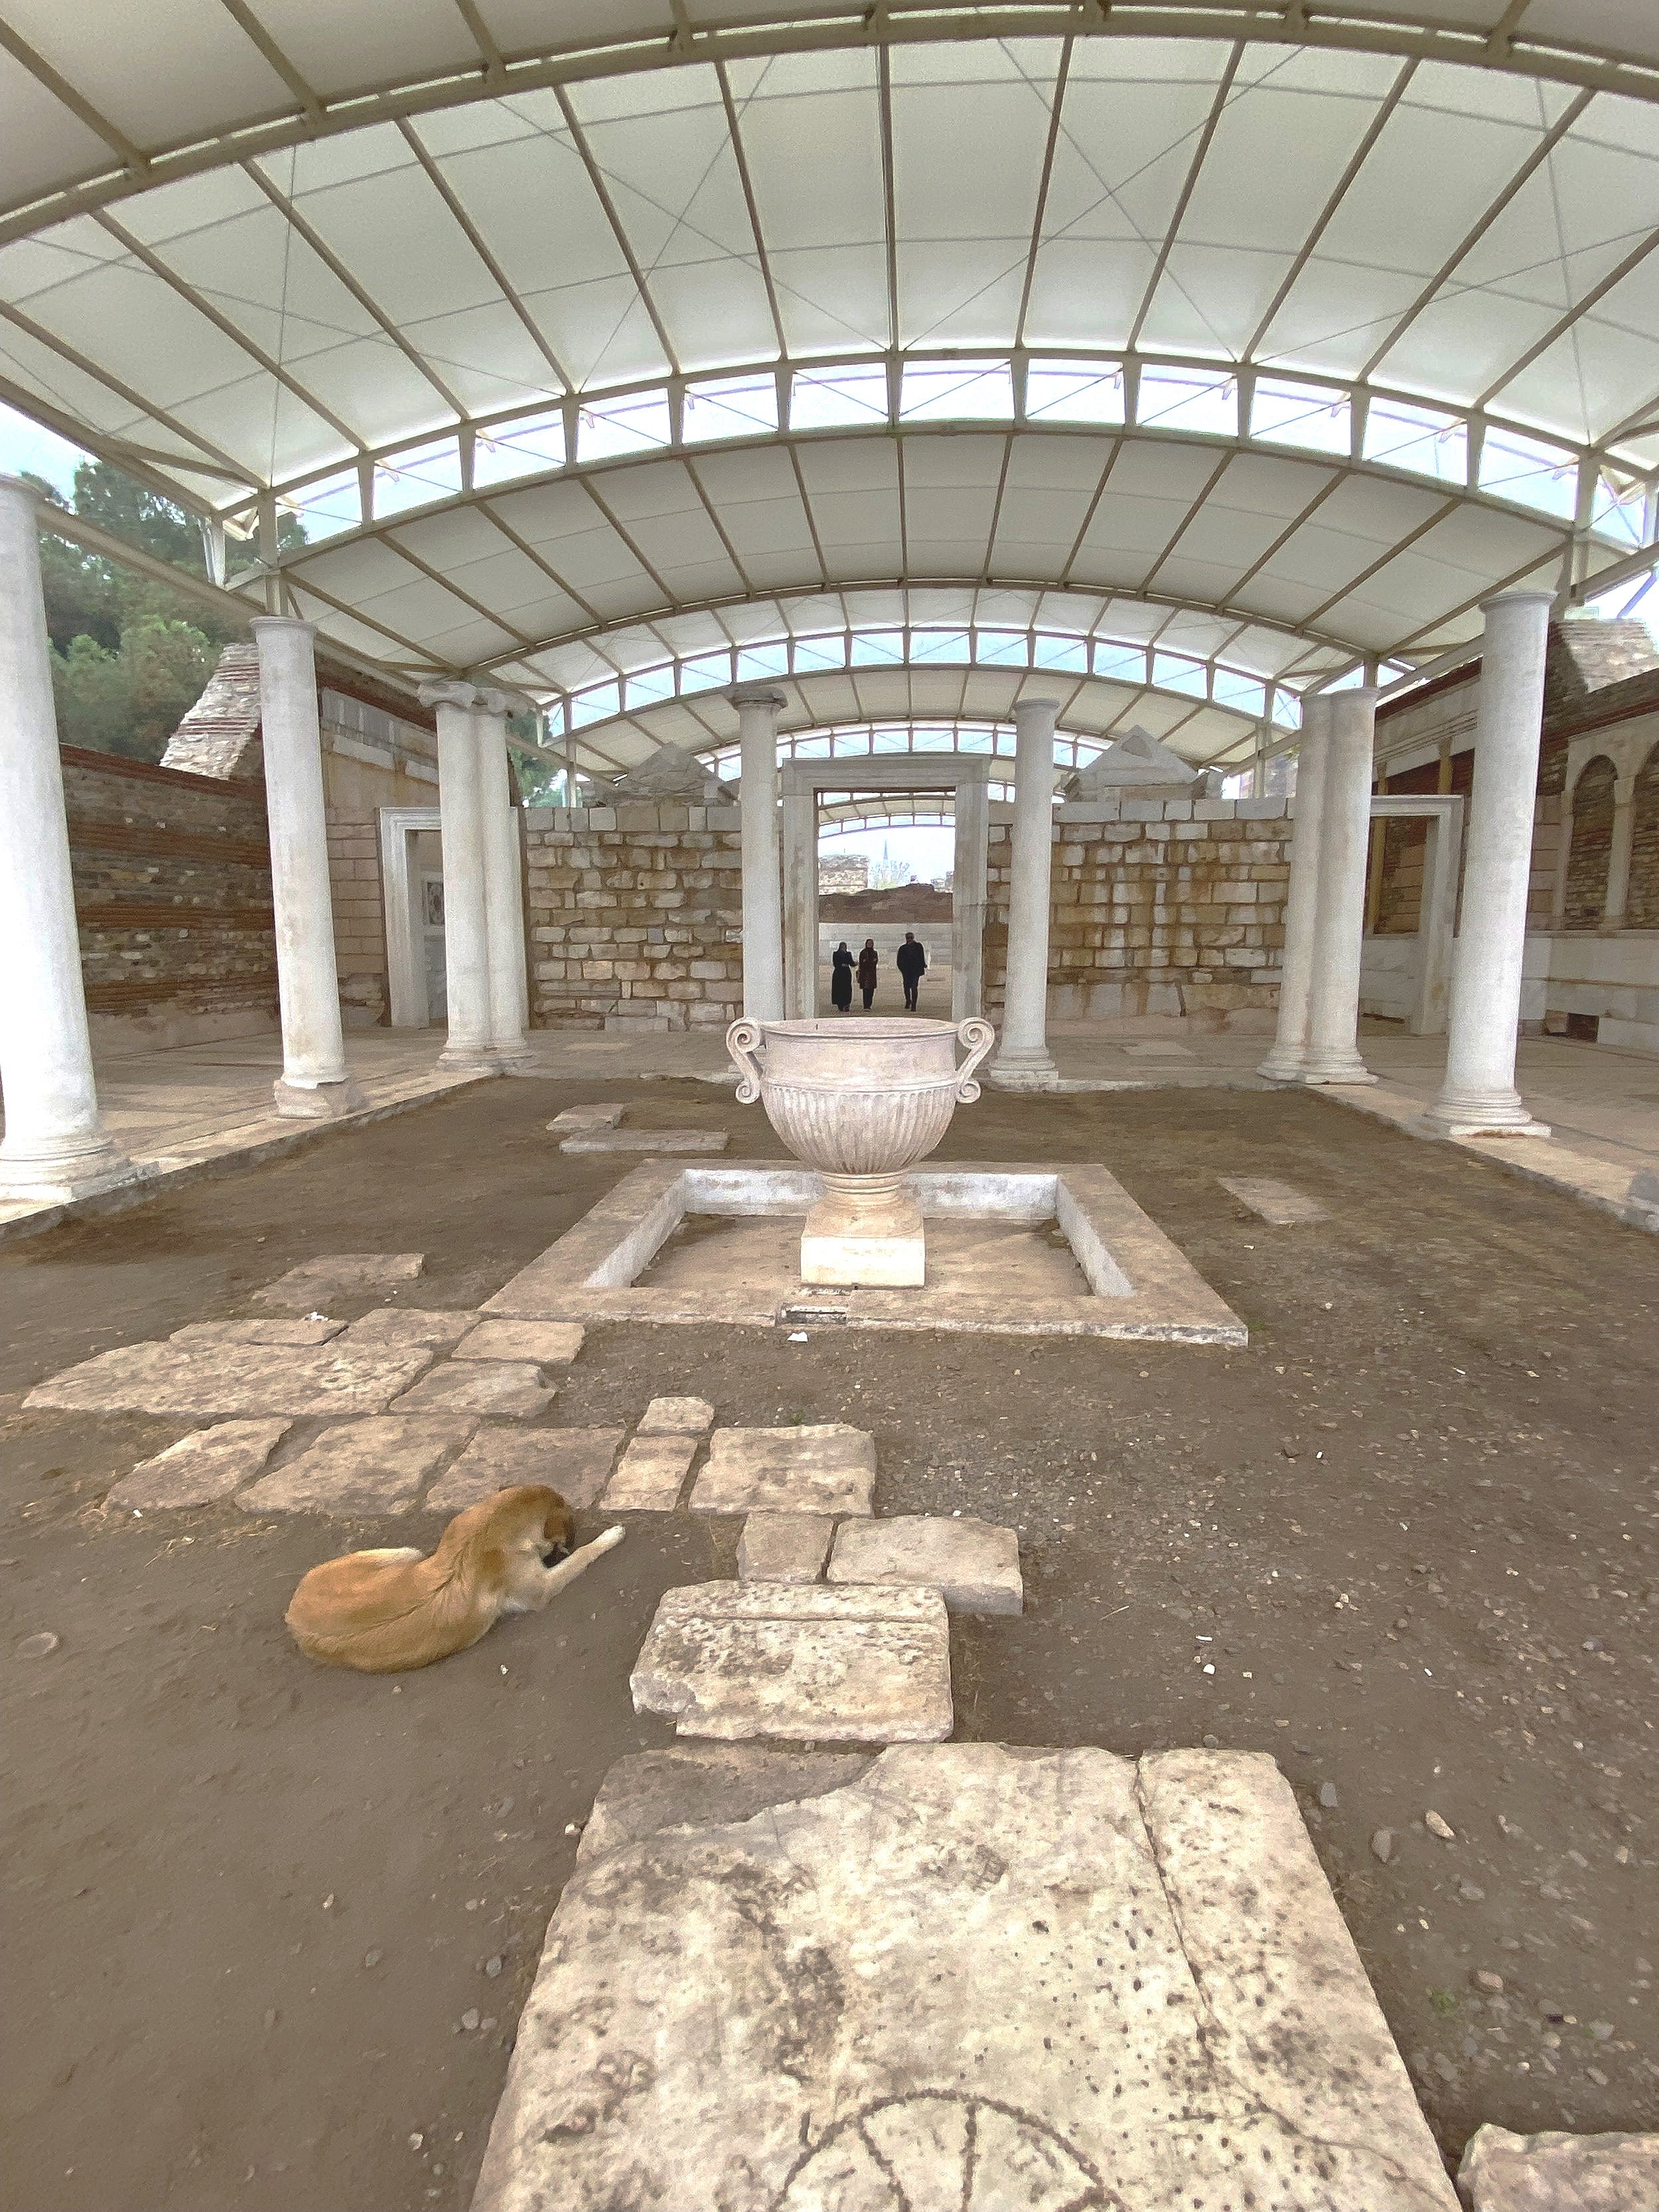 The forecourt of Sardis’ synagogue with a large fountain for ceremonial washing before prayers.